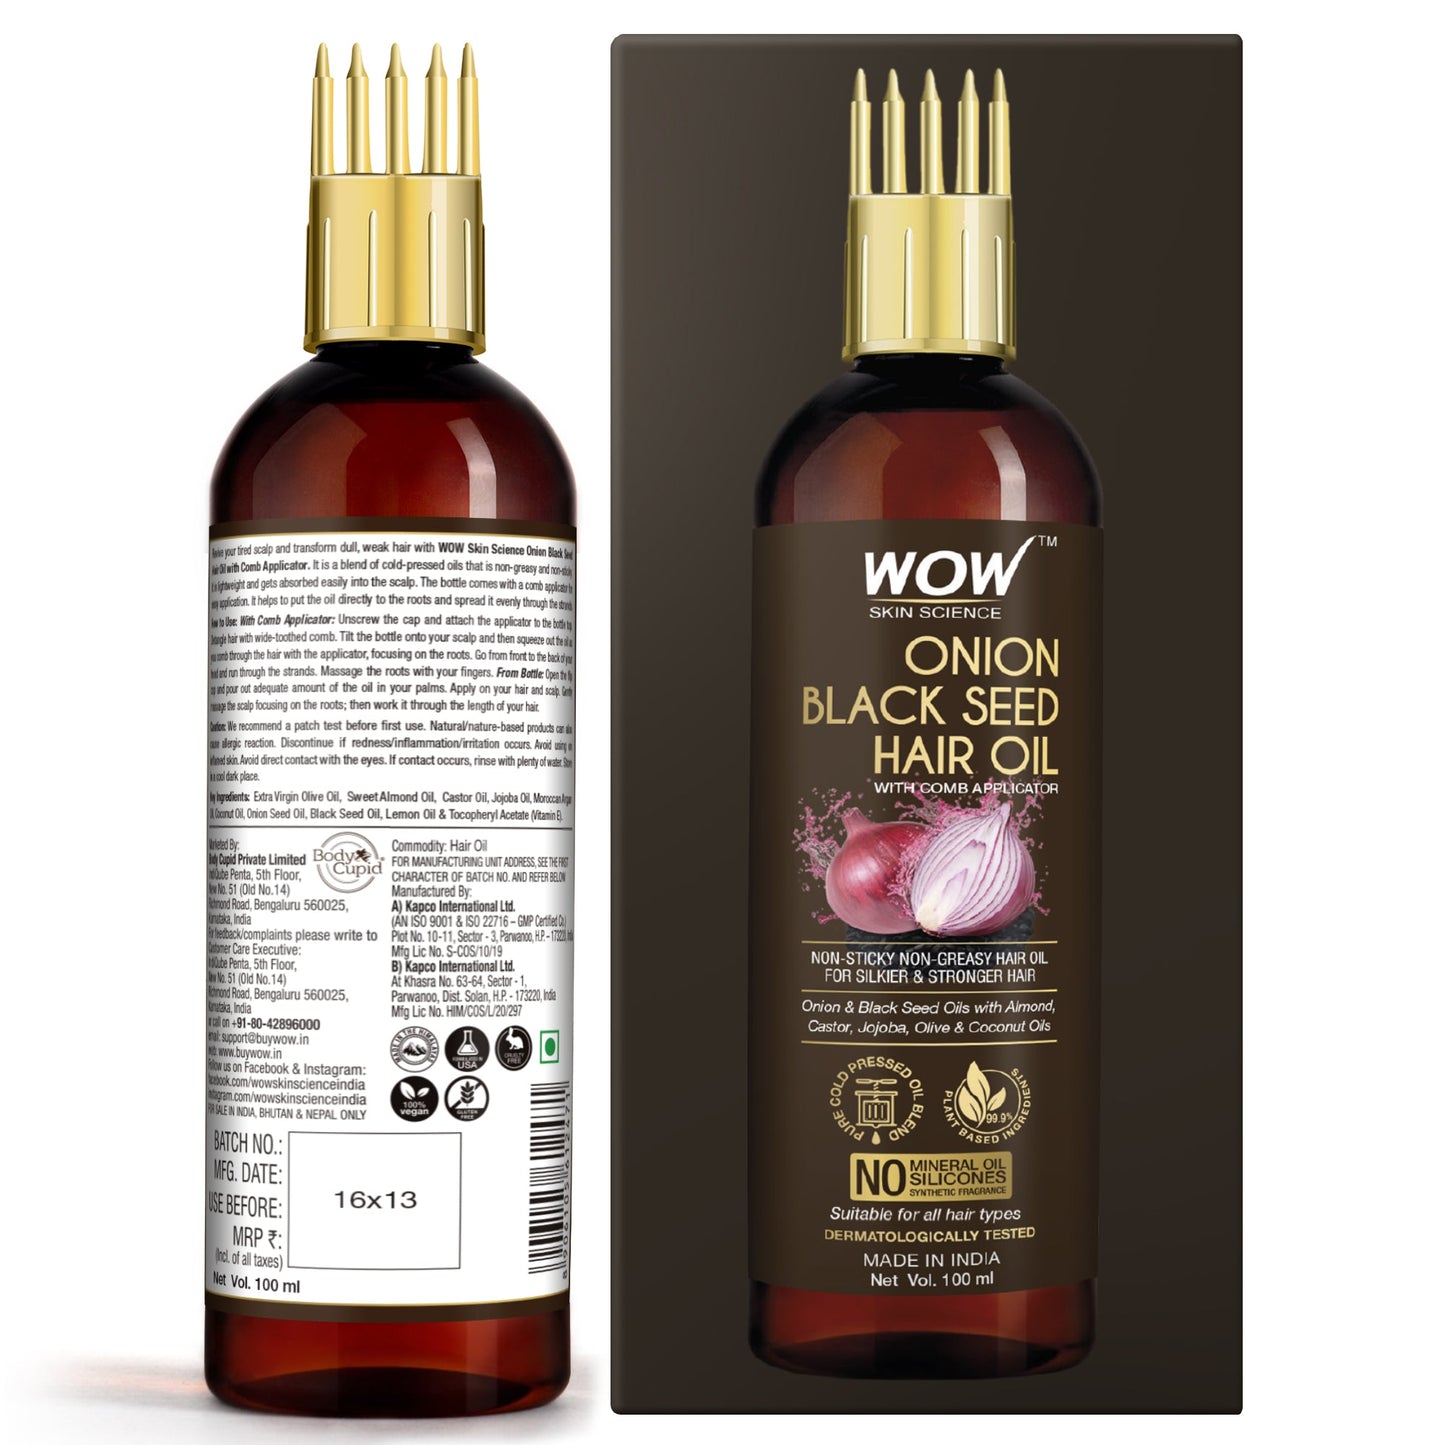 WOW Skin Science Onion Black Seed Hair Oil - With Comb Applicator - 100ml